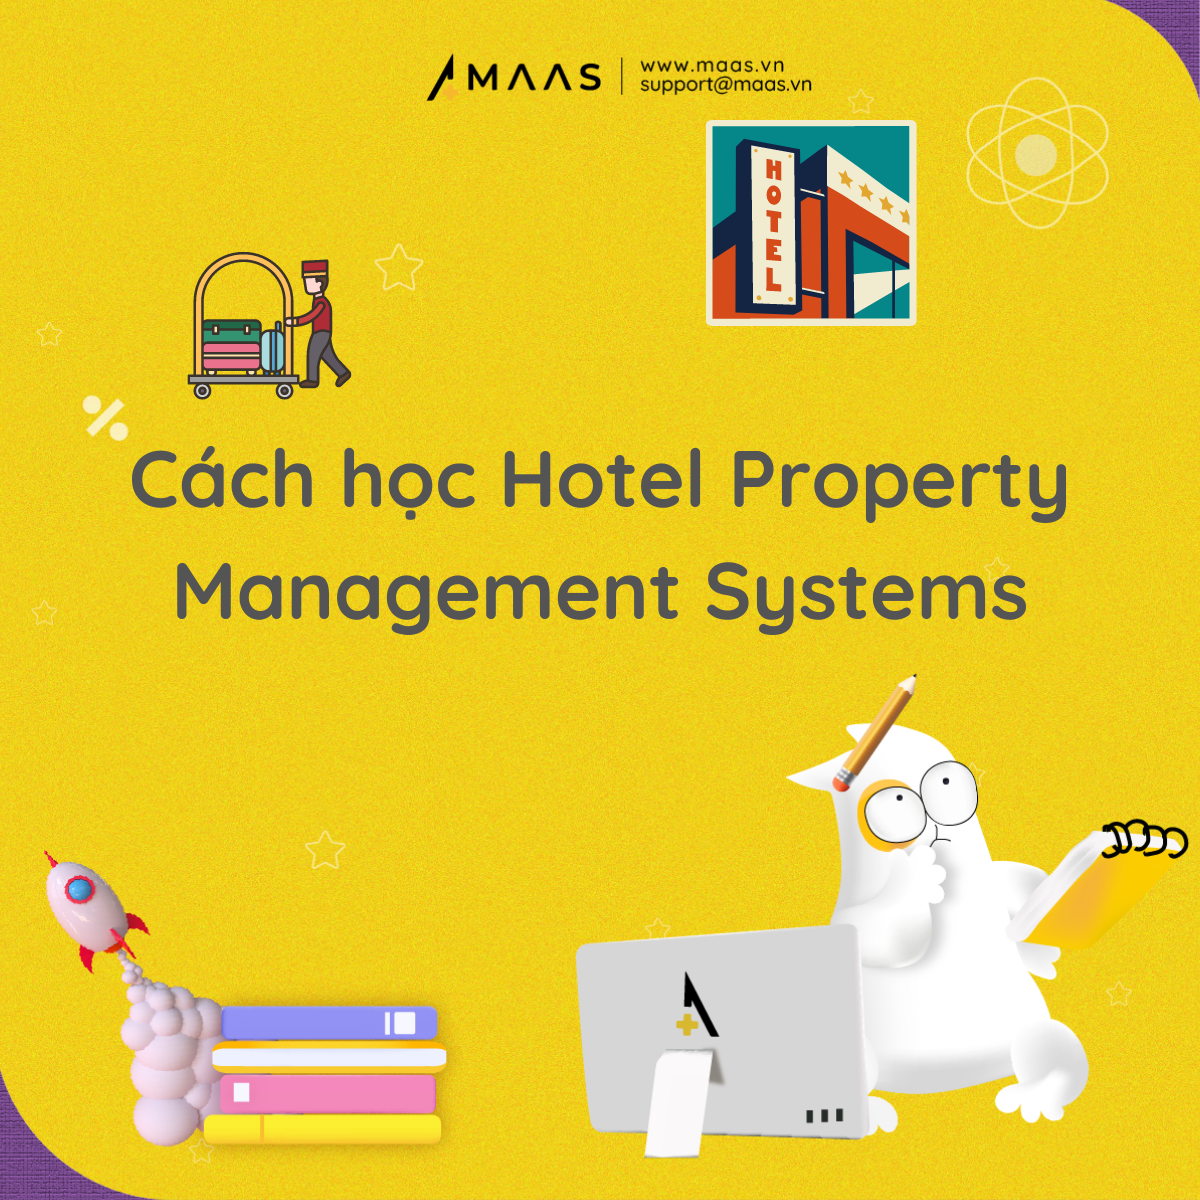 Hotel Property Management Systems